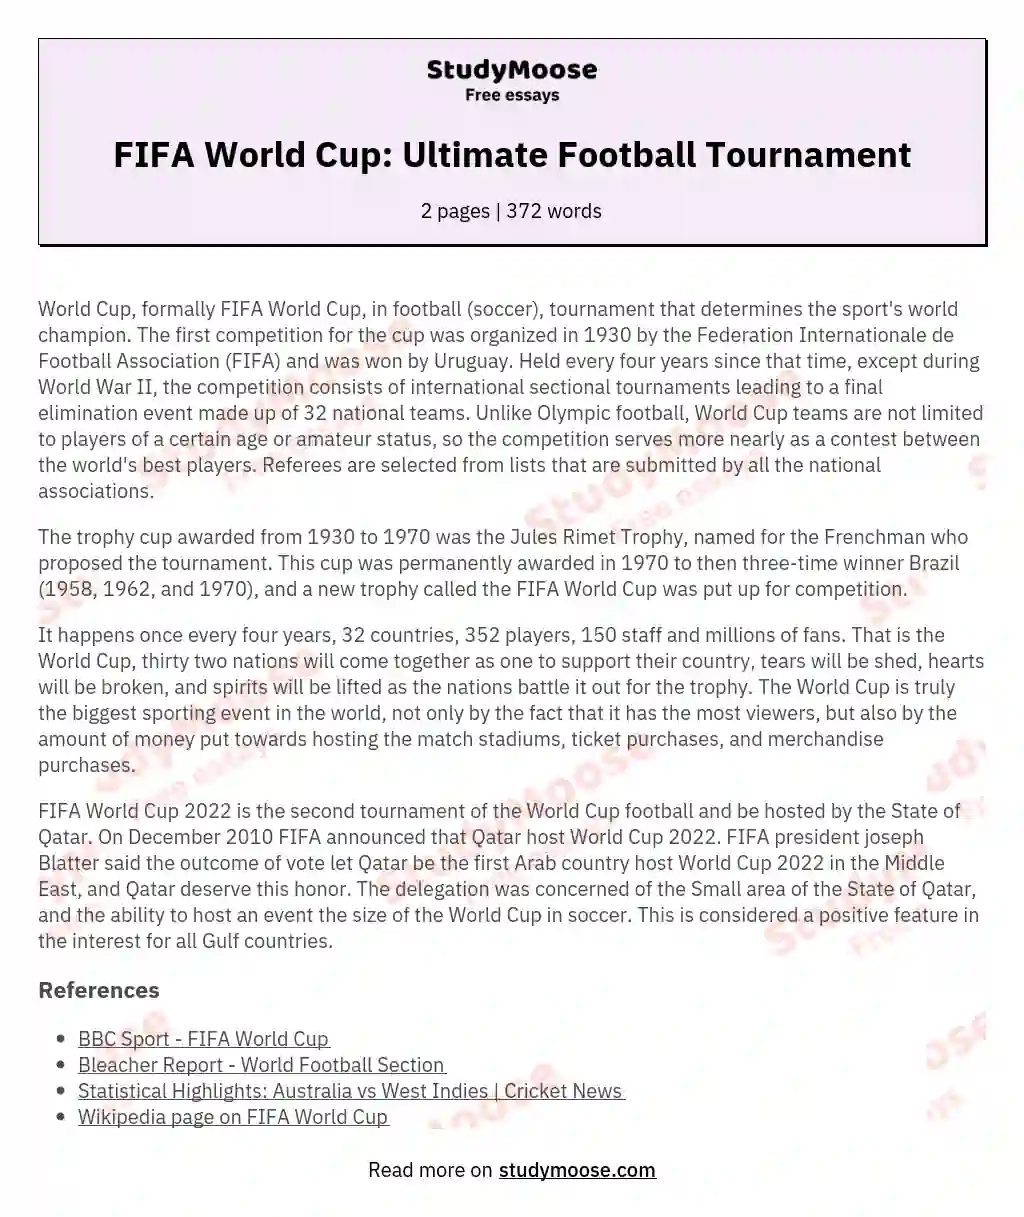 FIFA World Cup: Ultimate Football Tournament